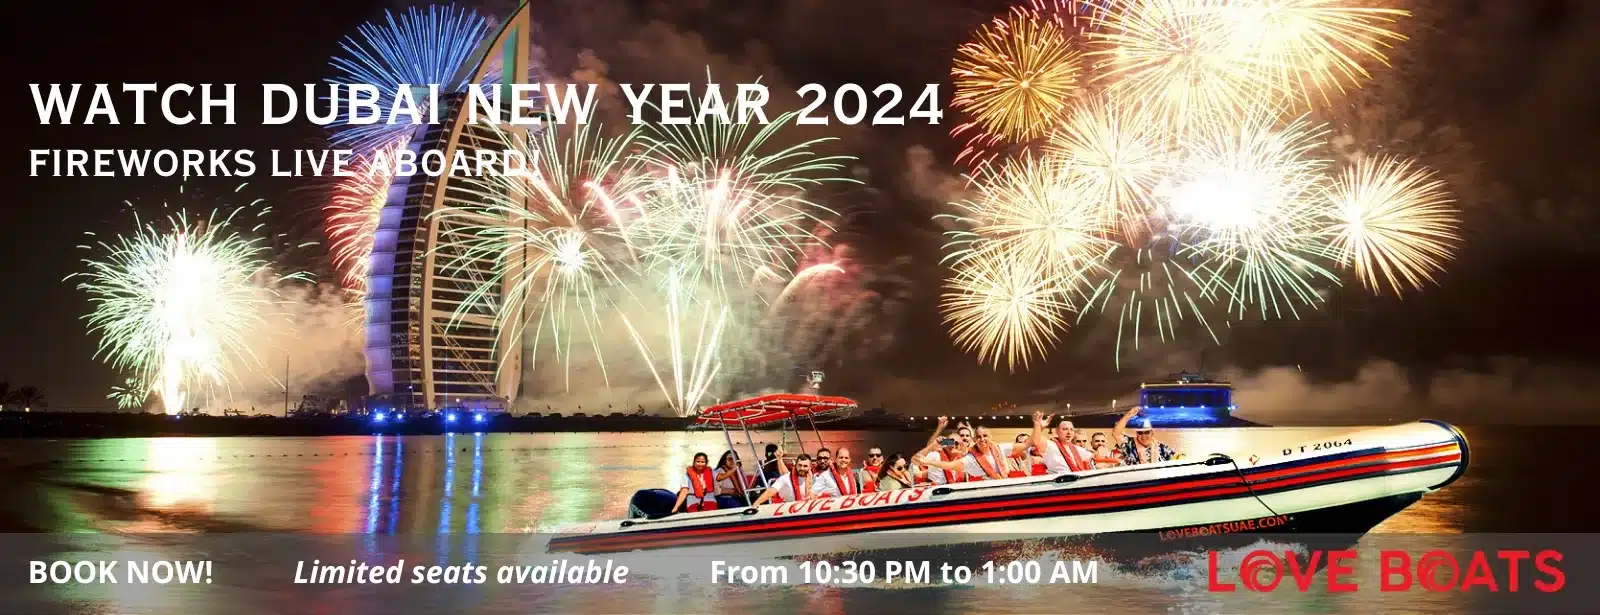 Love Boats – New Year’s Eve Fireworks Show